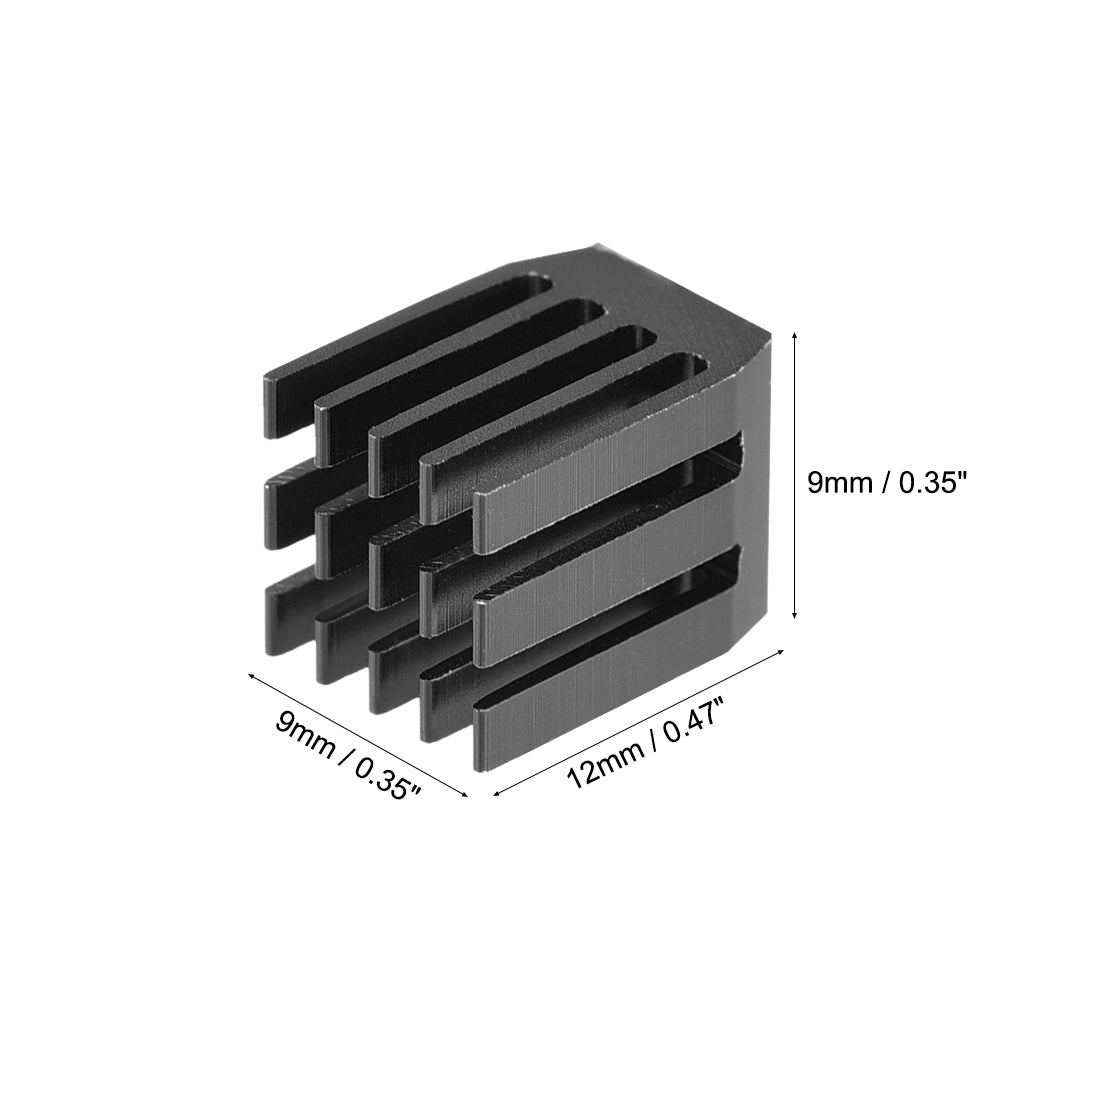 uxcell Uxcell Heatsink with Thermal Conductive Adhesive Tape 9 x 9 x 12mm Black 10pcs